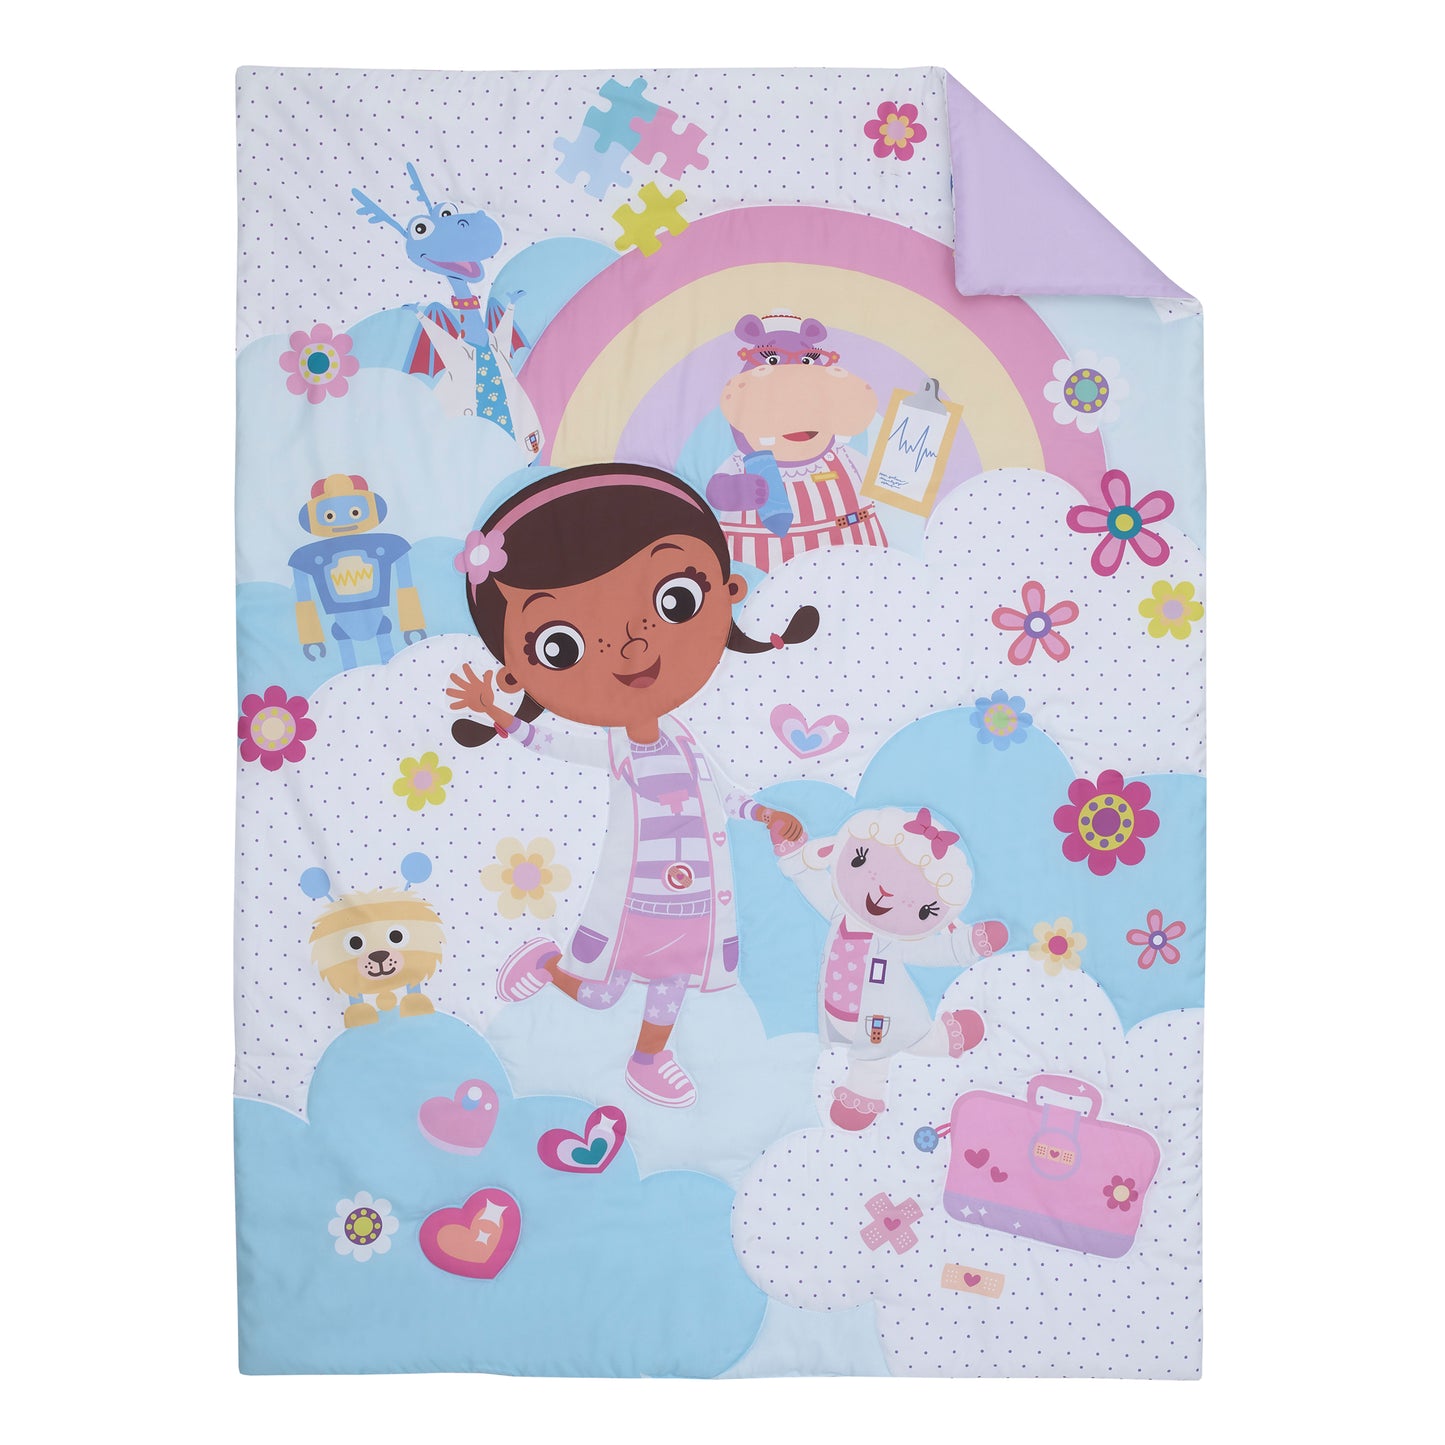 Disney Doc McStuffins - Cuddle Team Purple, White, and Blue 4 Piece Toddler Bed Set - Comforter, Fitted Bottom Sheet, Flat Top Sheet, and Reversible Pillowcase